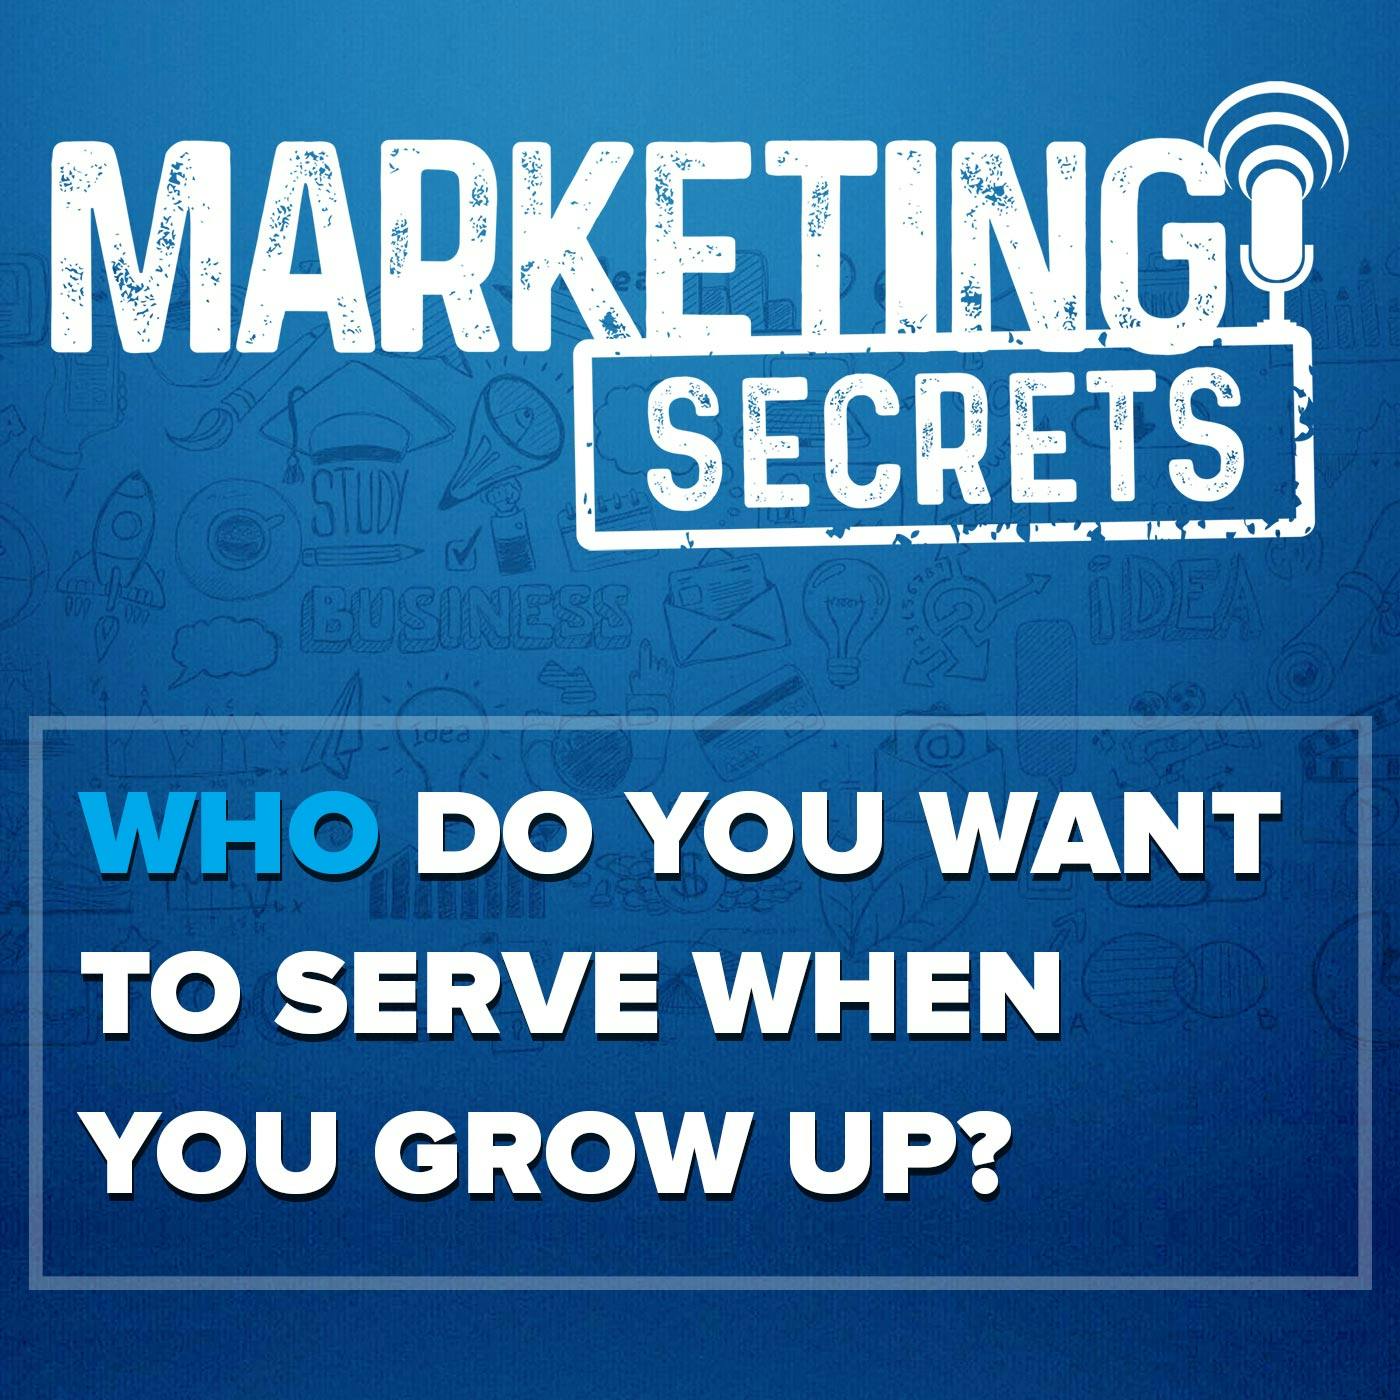 Who Do You Want To Serve When You Grow Up?